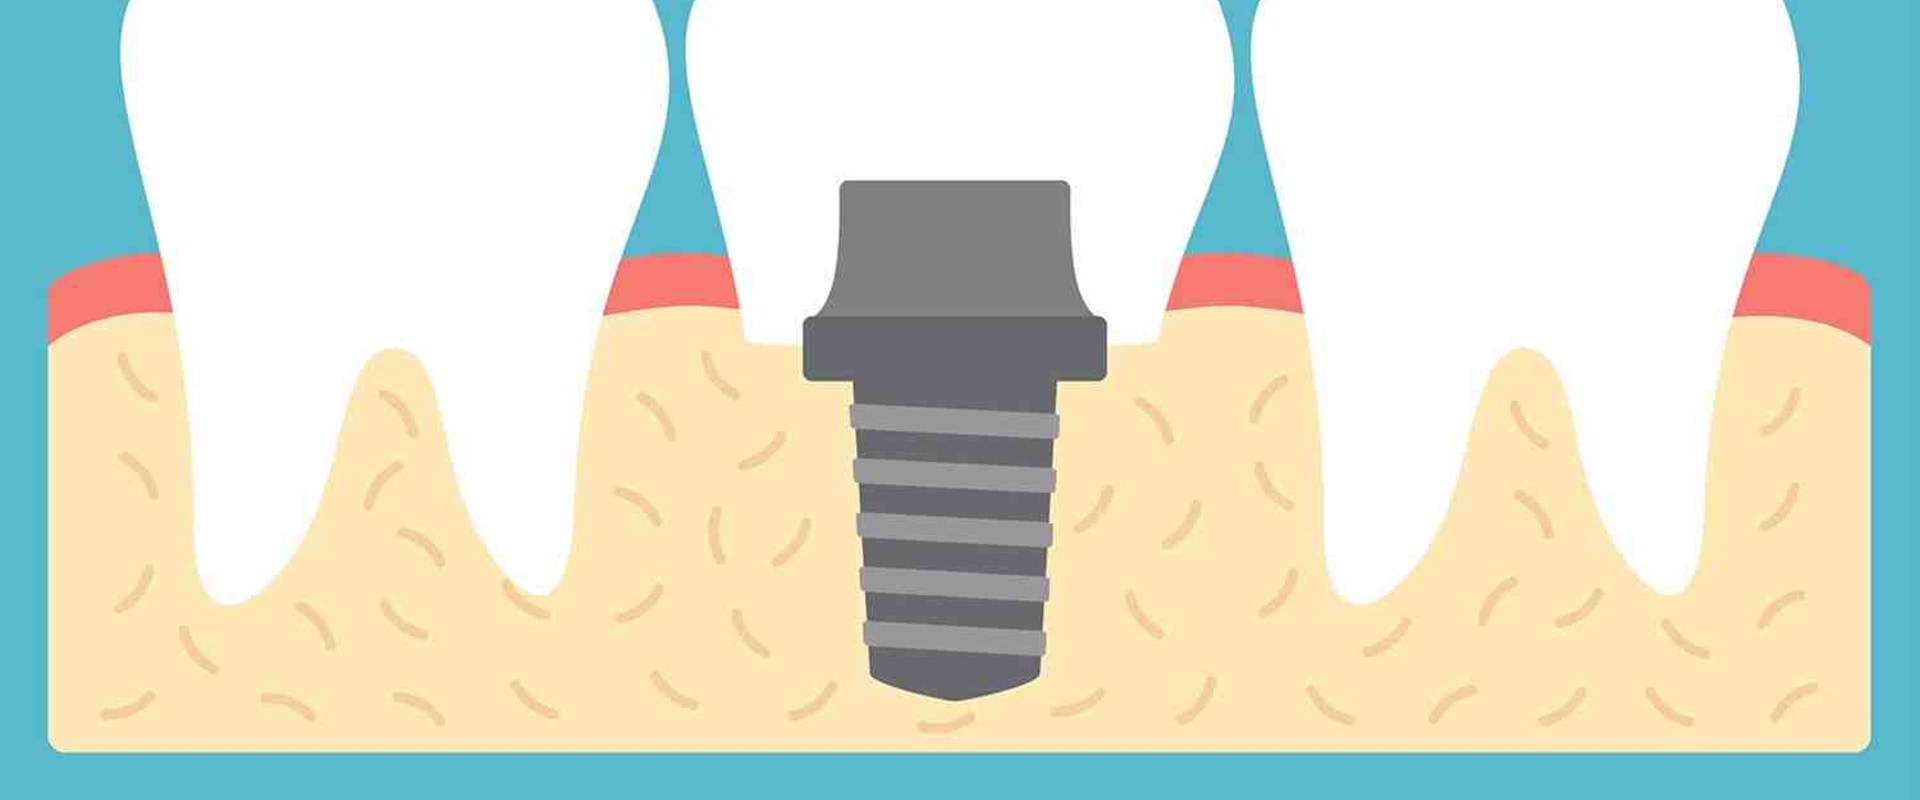 Do dental implants have serial numbers?